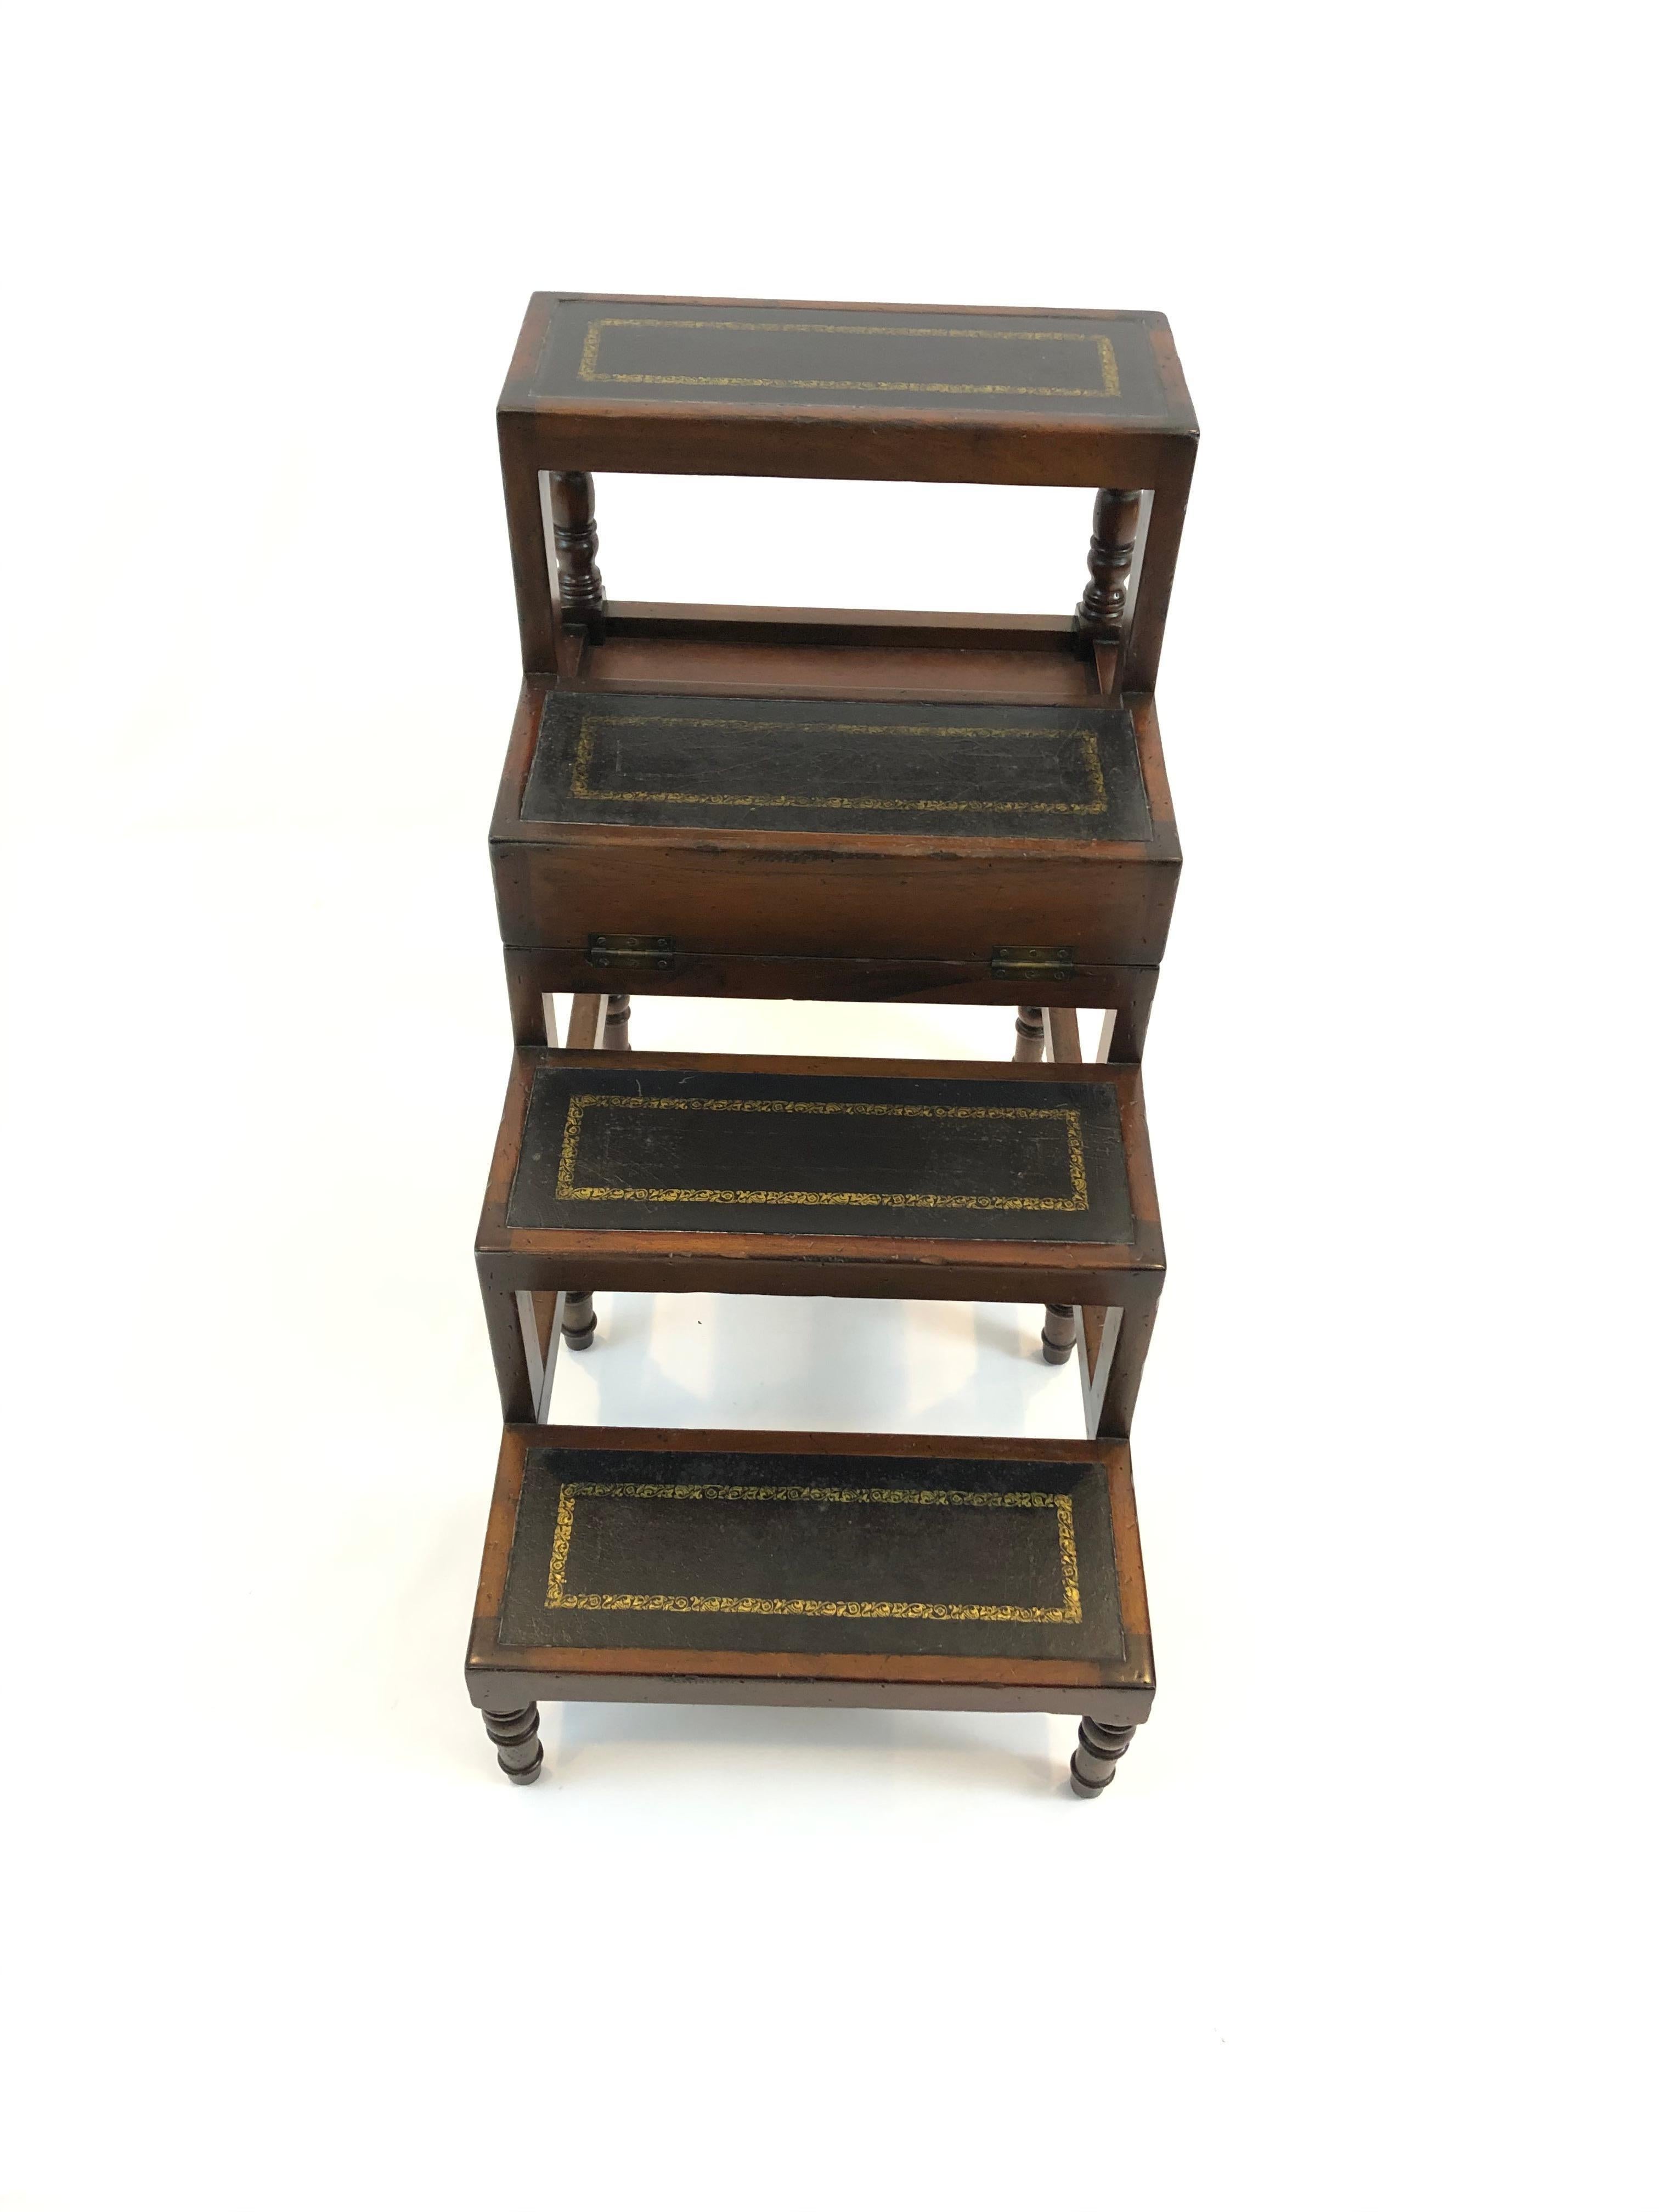 A cleverly designed versatile mahogany & black tooled leather set of library steps that converts to a rectangular coffee or end table. Legs are handsomely turned and risers or top of table have luscious craquelure and gold embossed decoration.